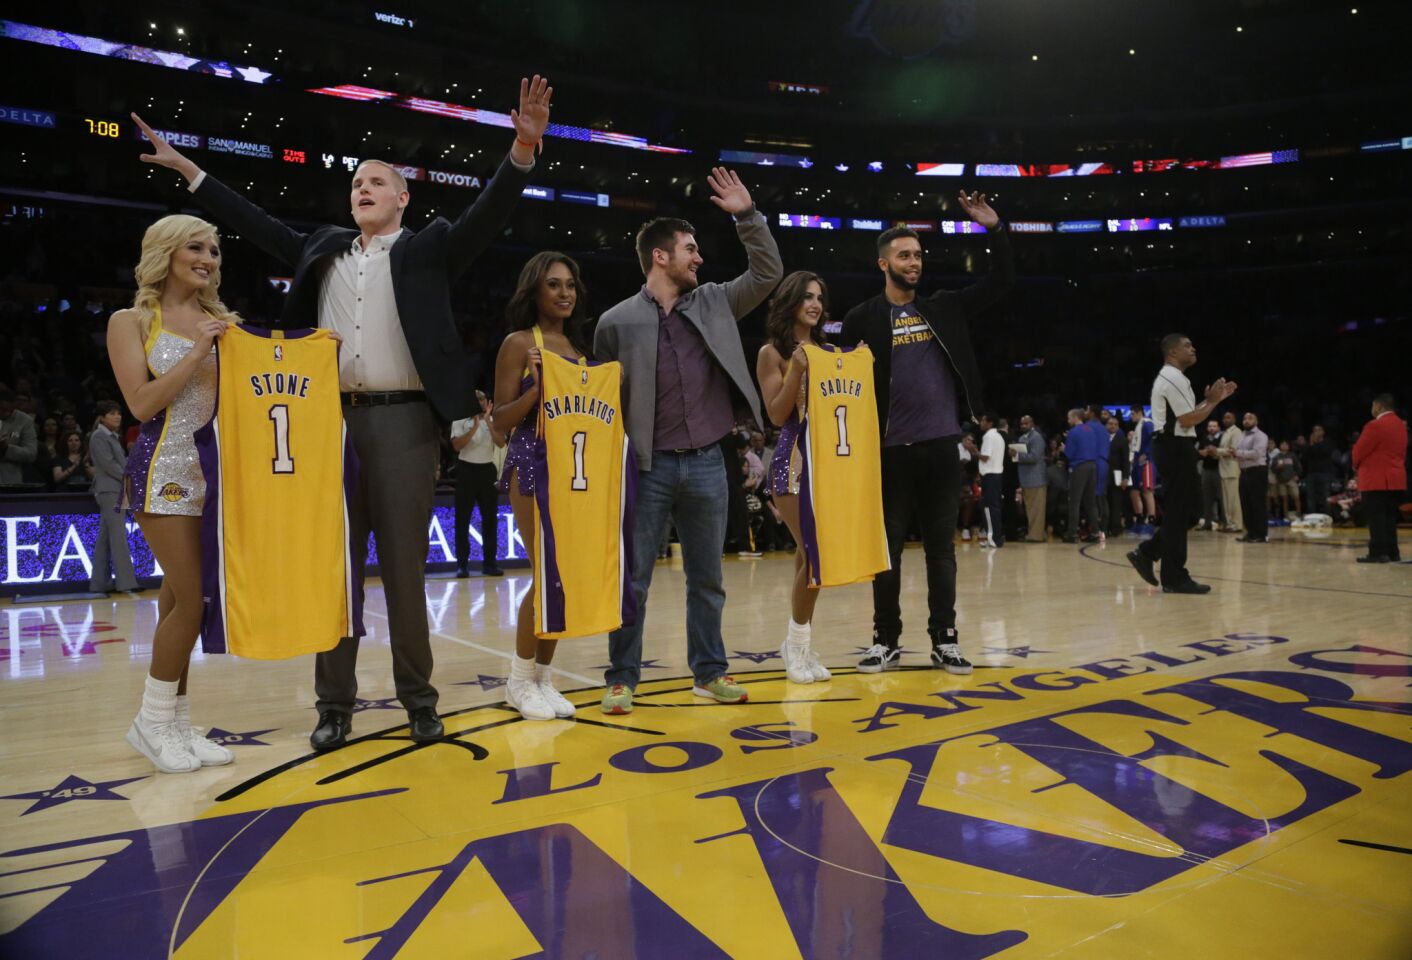 The Laker Girls present jerseys to Spencer Stone, Alek Skarlatos and Anthony Sadler during a game against the Pistons. The three American men foiled a terrorist attack on a Paris-bound train in August.